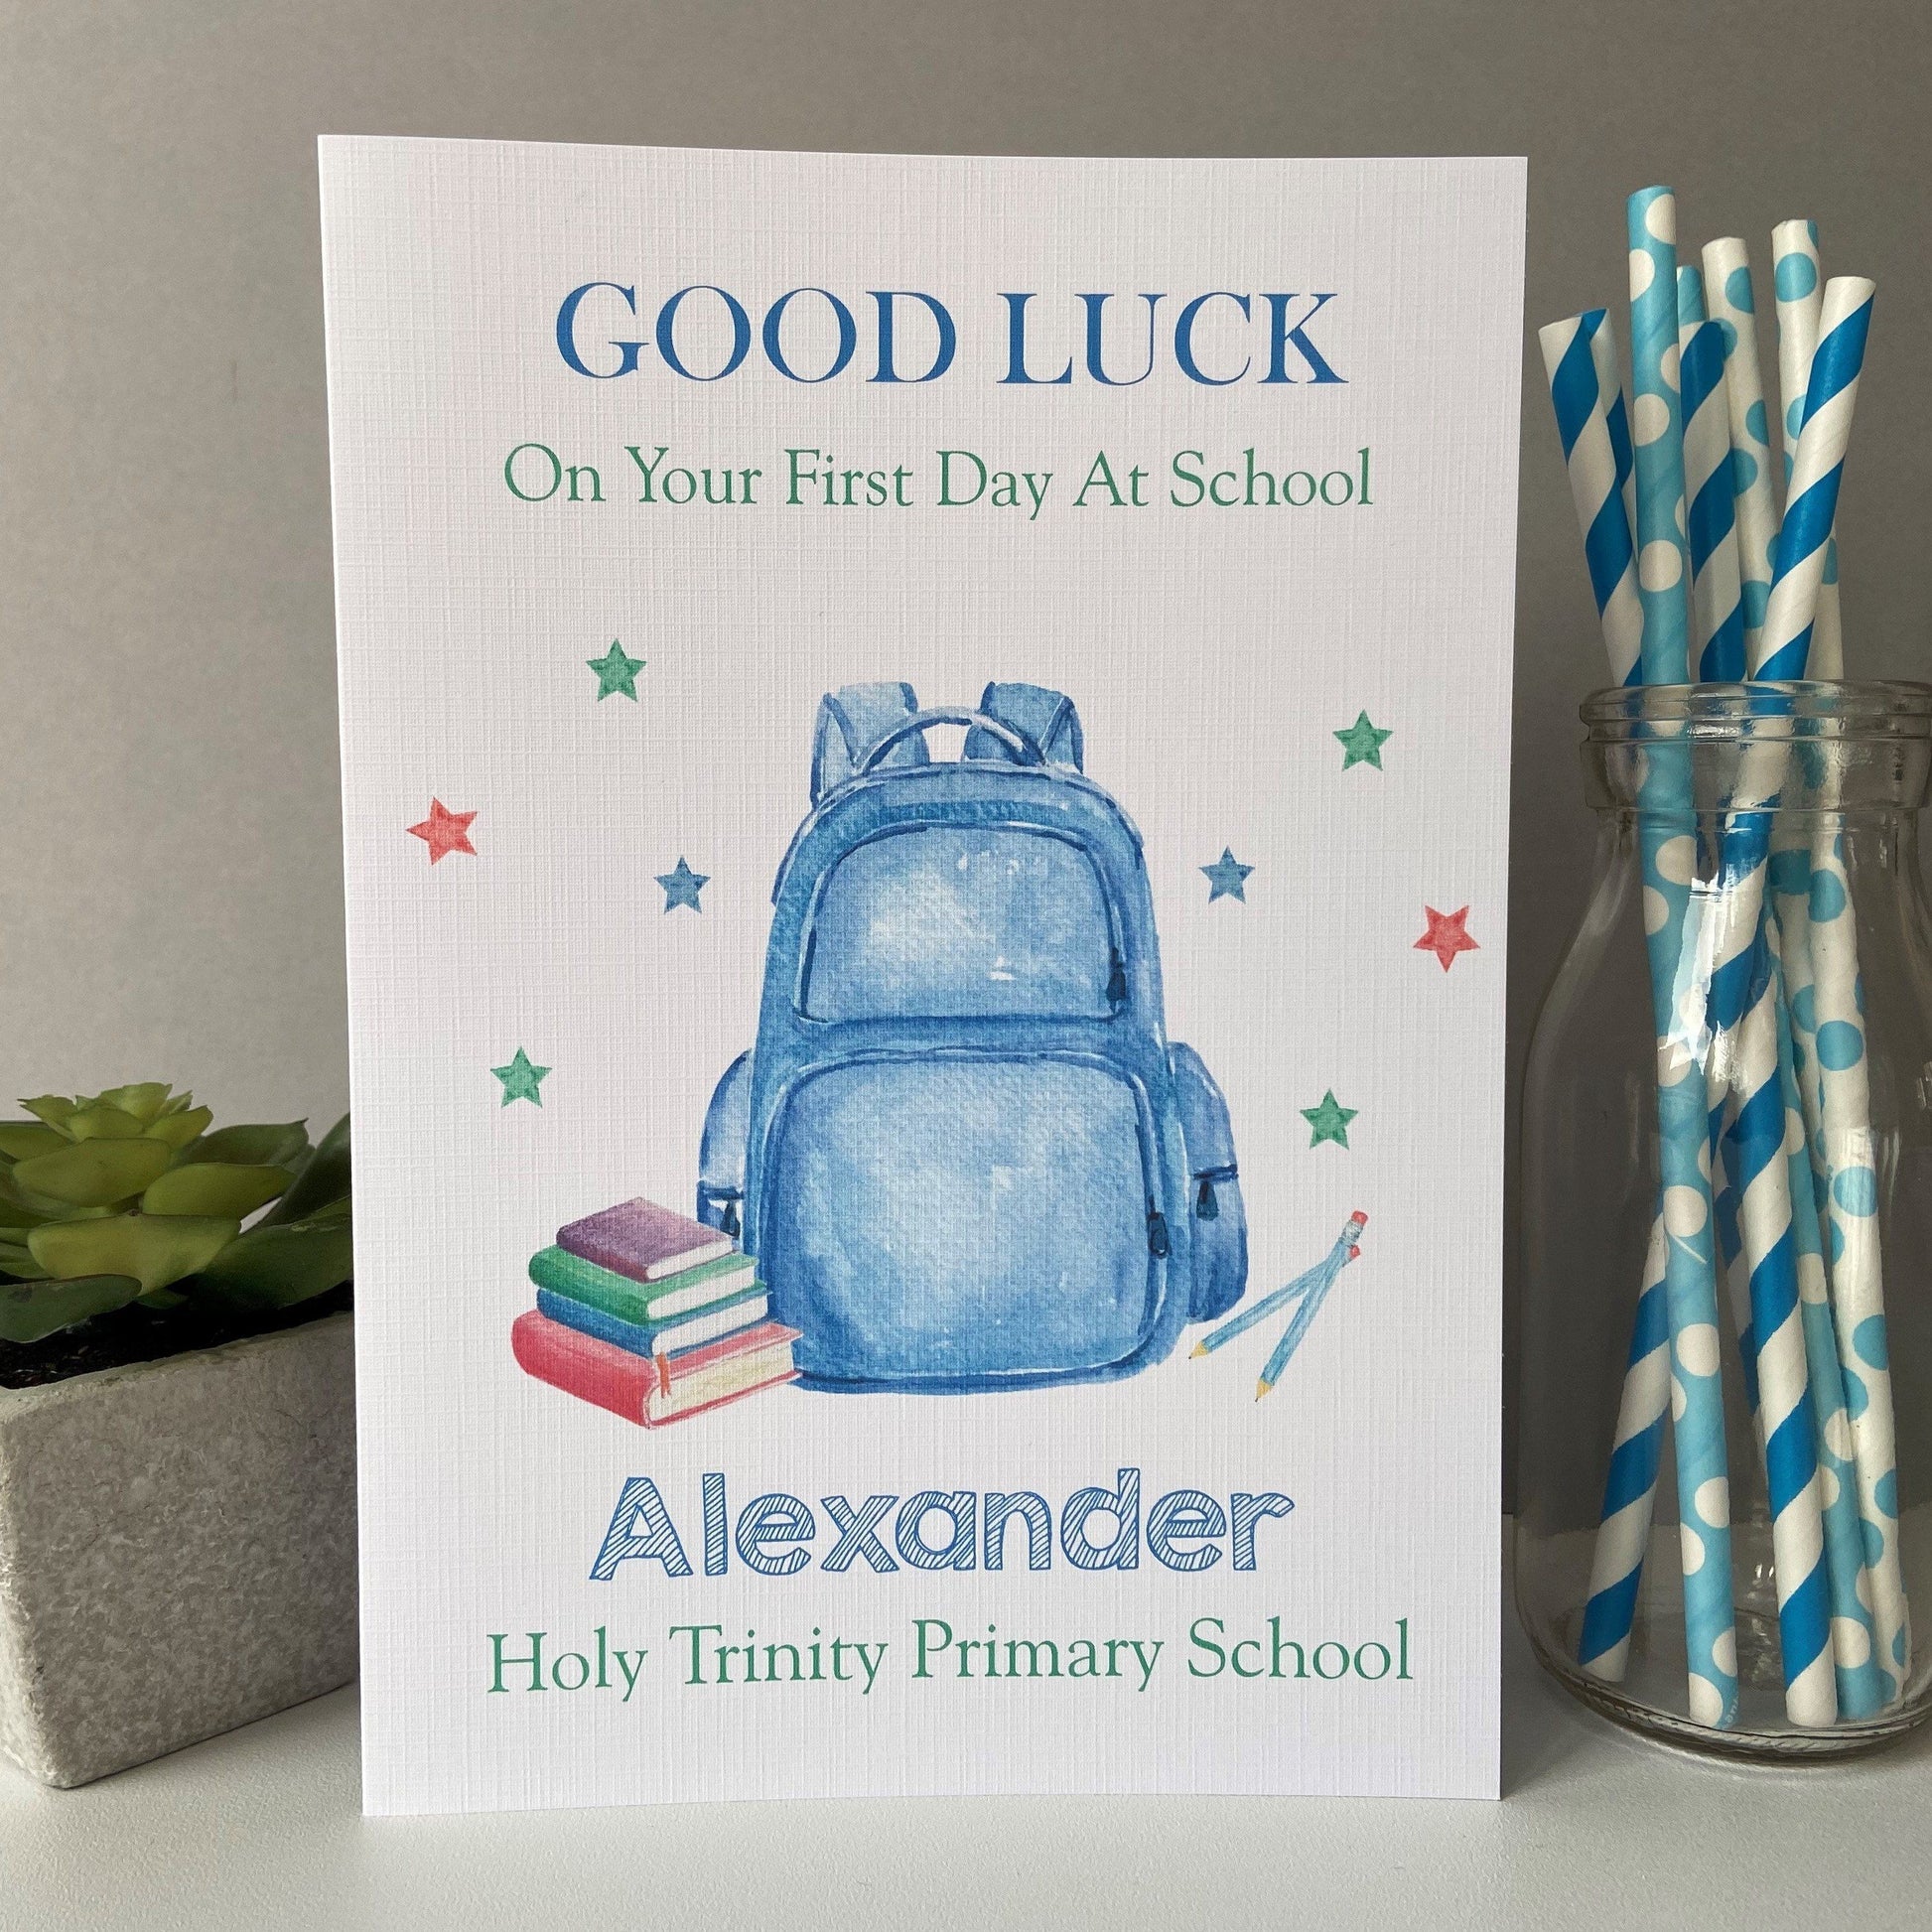 Personalised Boys Good Luck First Day At School Card Backpack Design - 2 Size Options